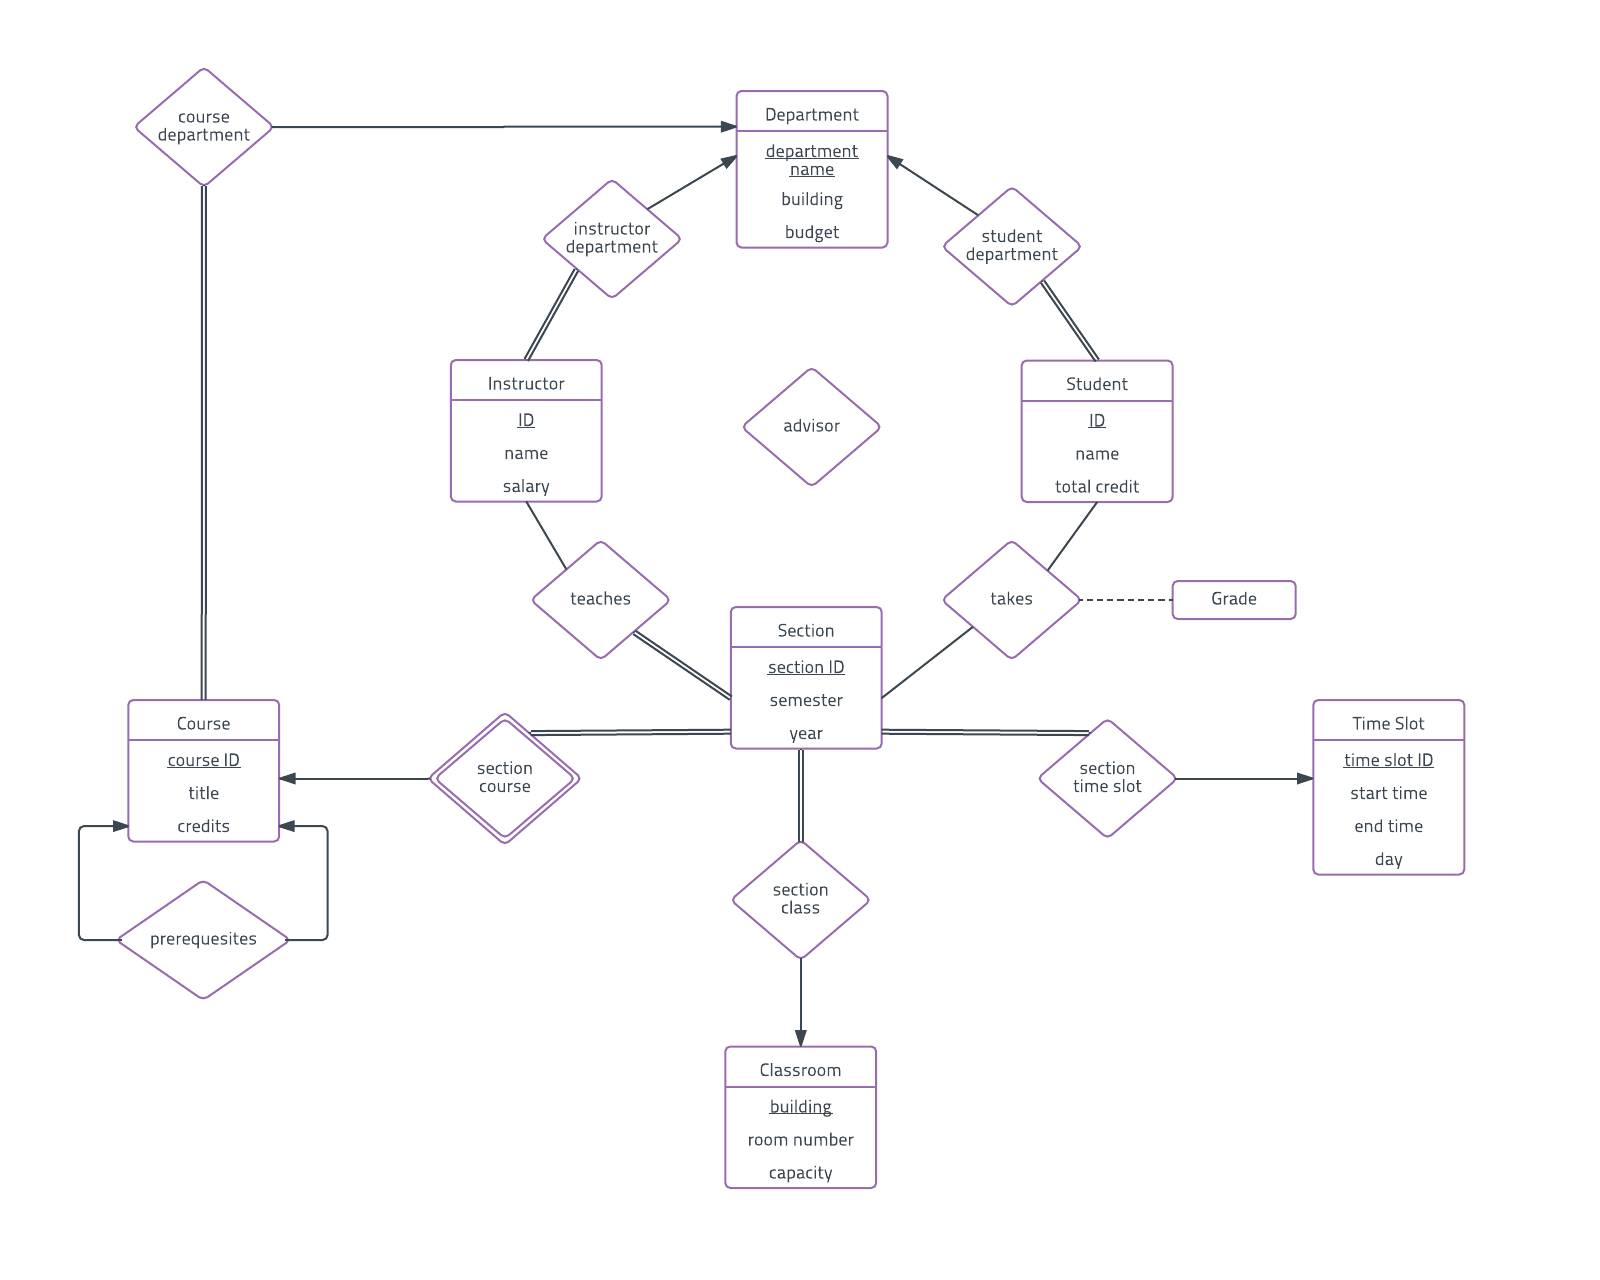 Er Diagram Examples And Templates | Lucidchart pertaining to Simple Er Diagram Examples